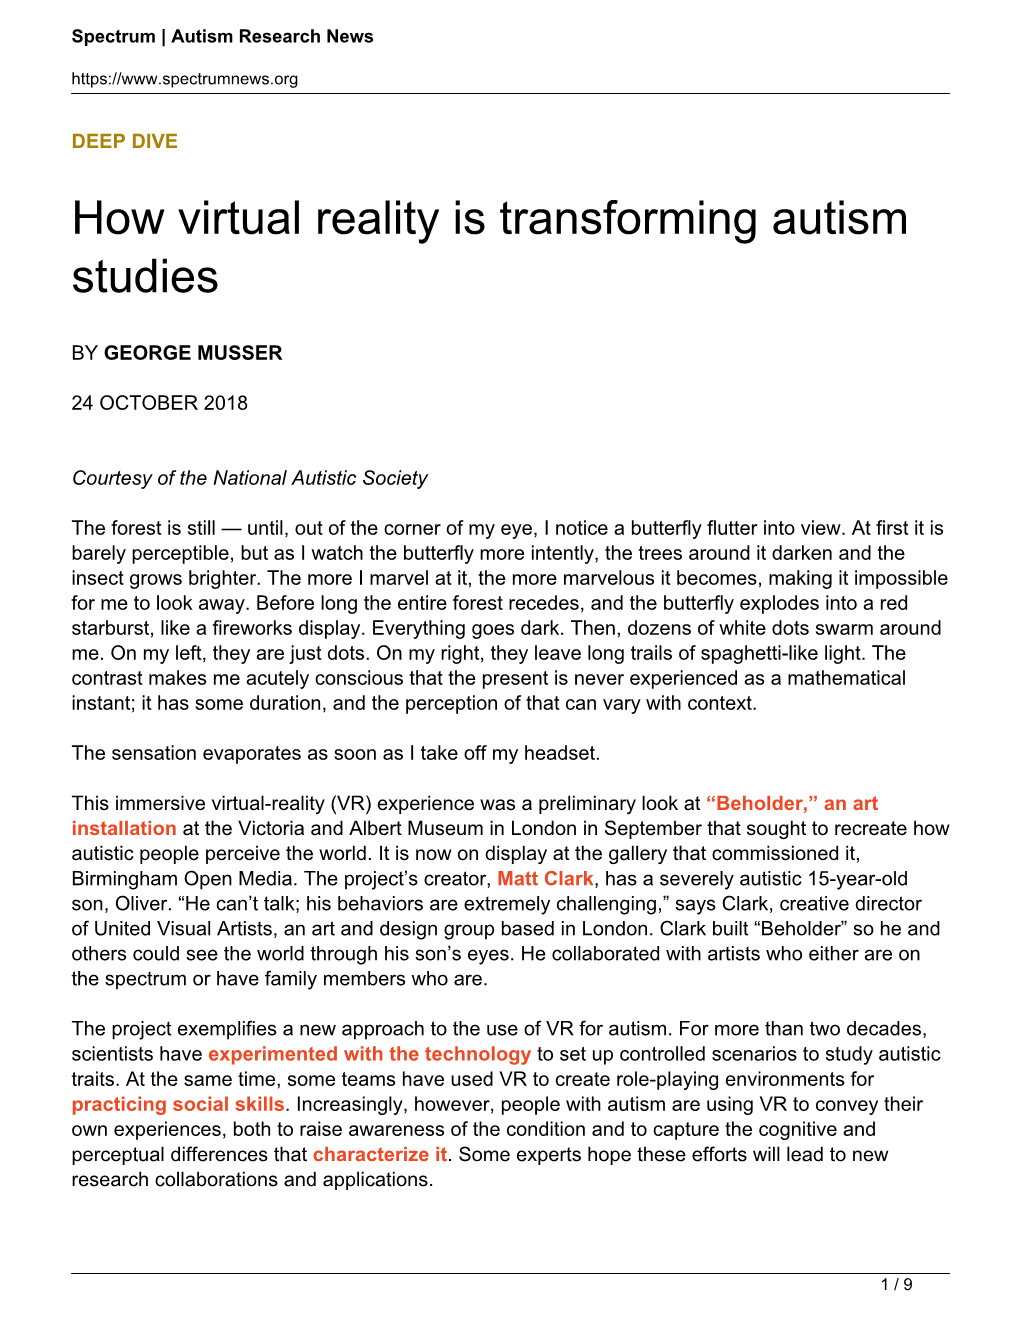 How Virtual Reality Is Transforming Autism Studies